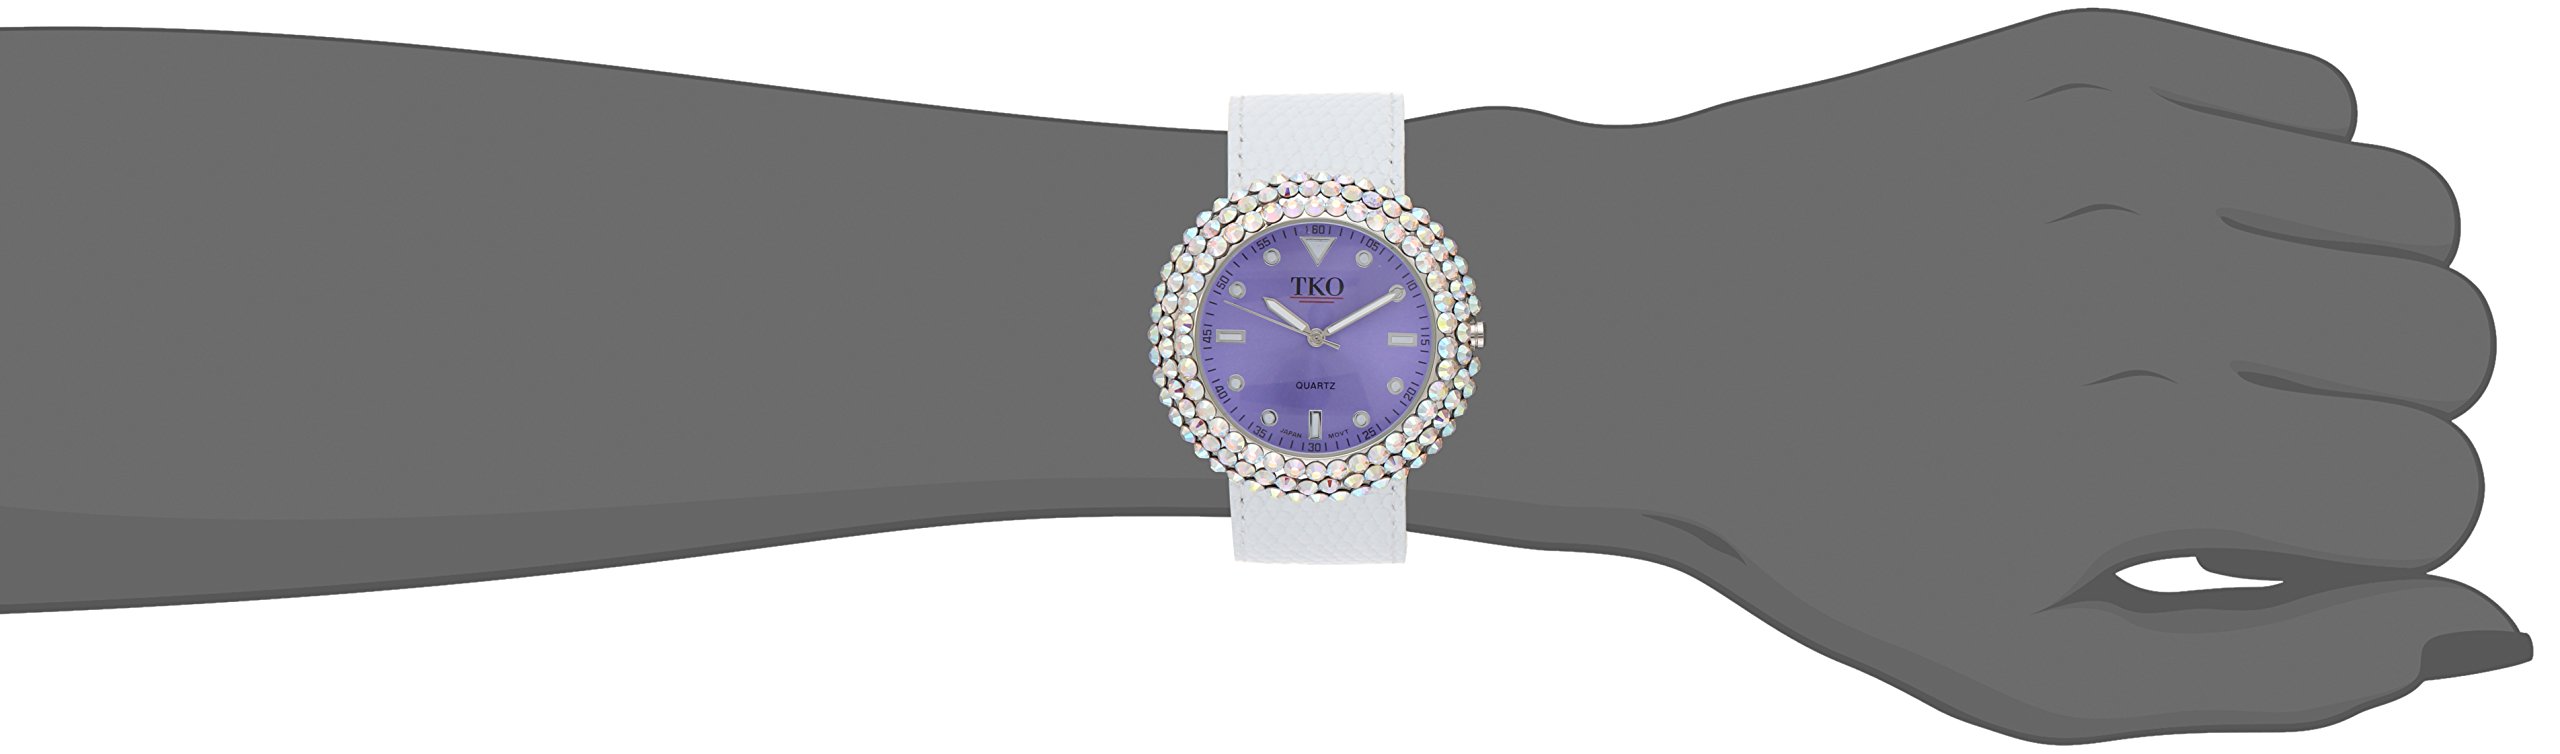 TKO Women's Crystal Slap Watch with Crystal Studded Case & Colorful Leather Wrist Strap